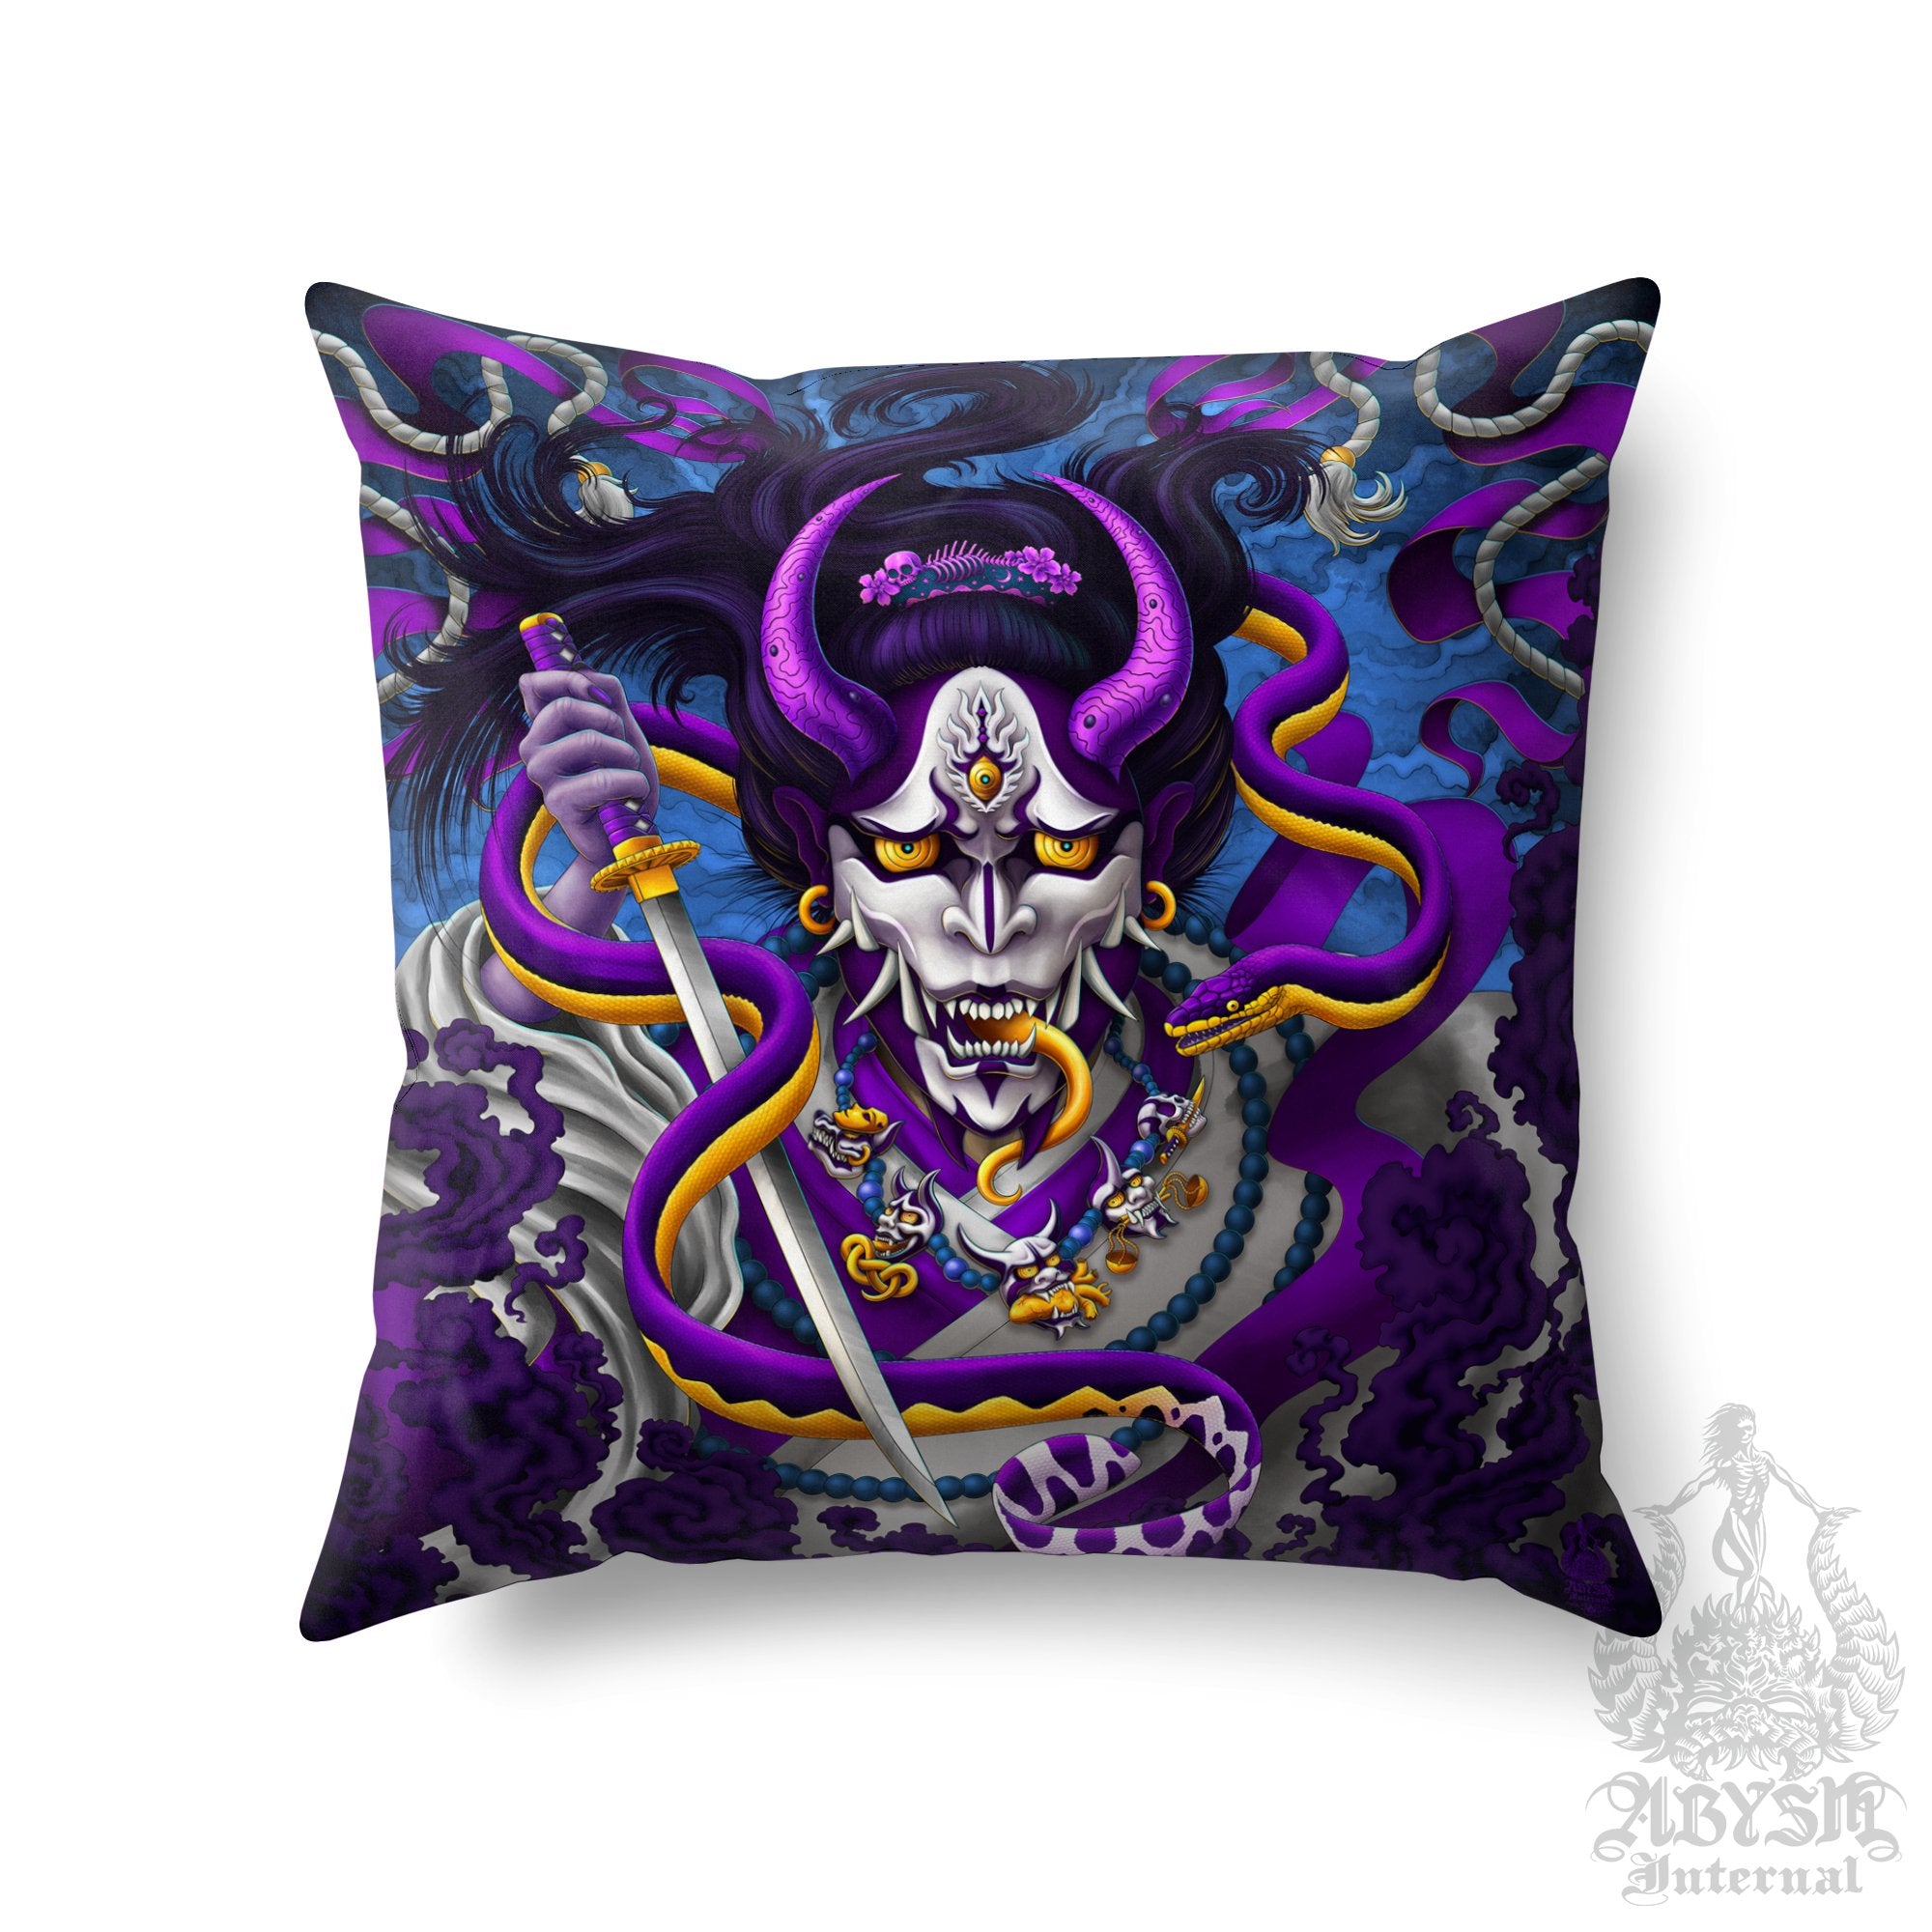 Hannya Throw Pillow, Decorative Accent Pillow, Square Cushion Cover, Japanese Demon & Snake, Gamer Room Decor - Blue & Purple - Abysm Internal